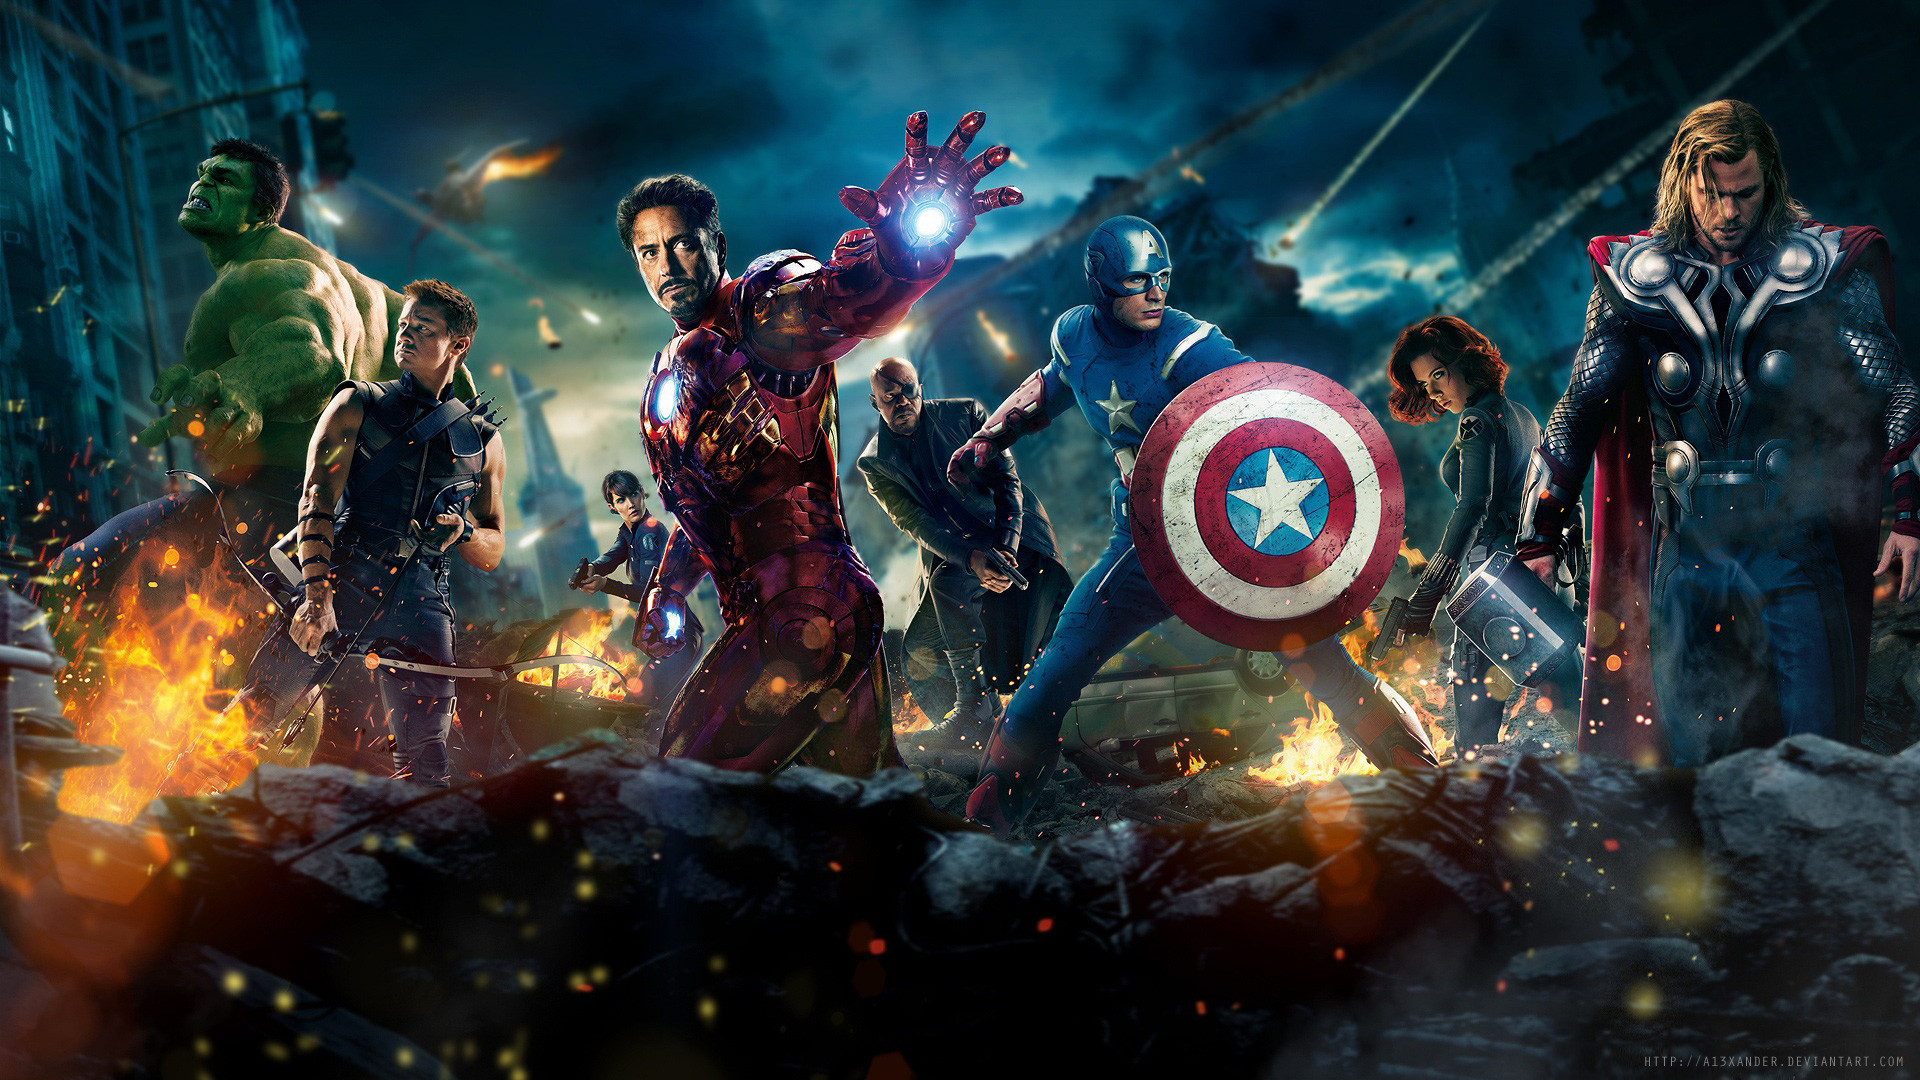 1920x1080 Iron Man, Avengers the movie, download full hd 1080p wallpaper, movie .